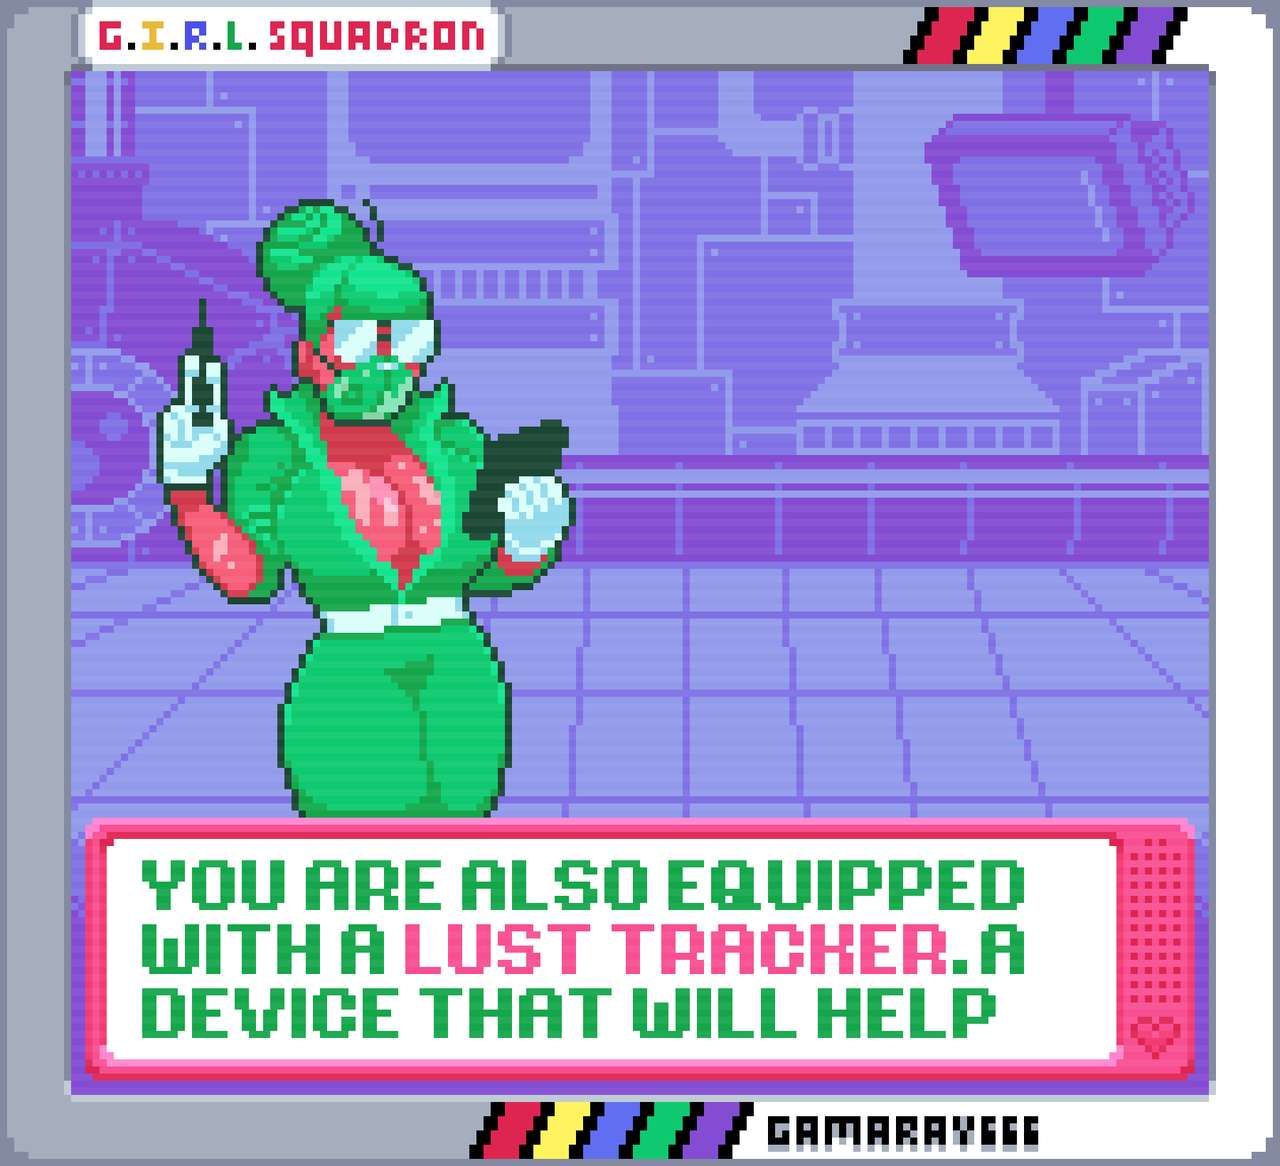 G. I. R. L. SQUADRON - A Choose Your Own Adventure 9